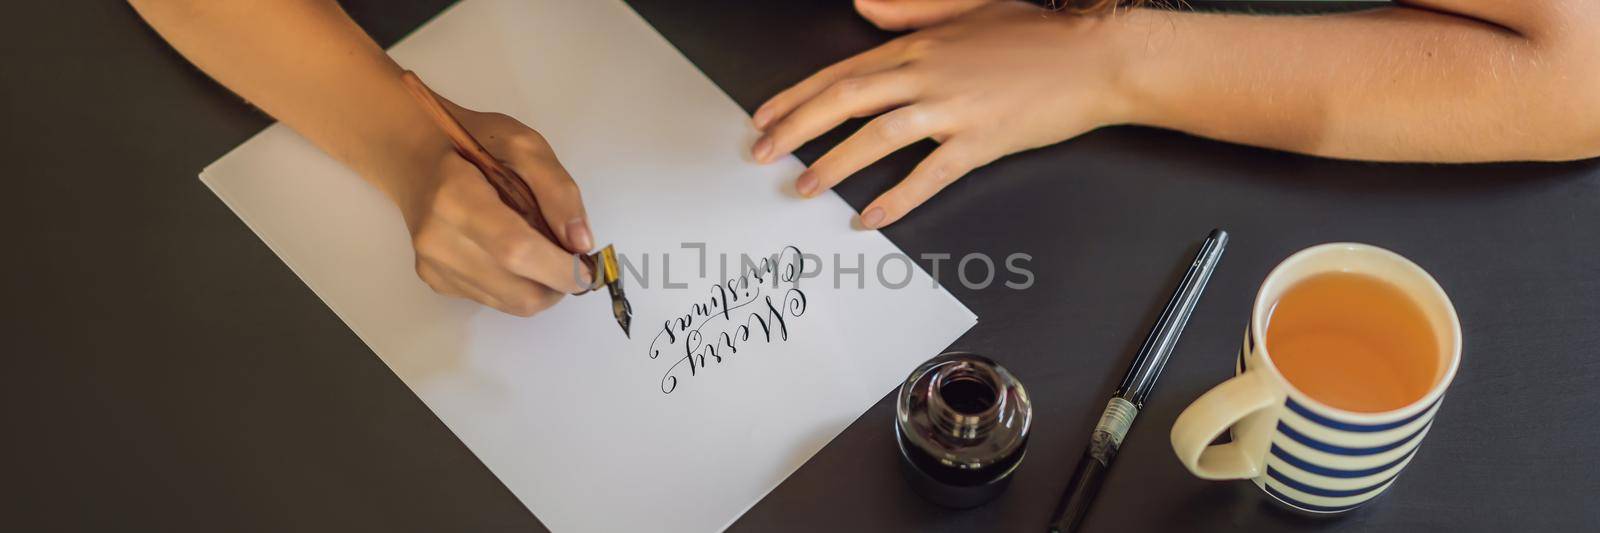 BANNER, LONG FORMAT Merry christmas and a happy new year. Calligrapher Young Woman writes phrase on white paper. Inscribing ornamental decorated letters. Calligraphy, graphic design, lettering, handwriting, creation concept by galitskaya